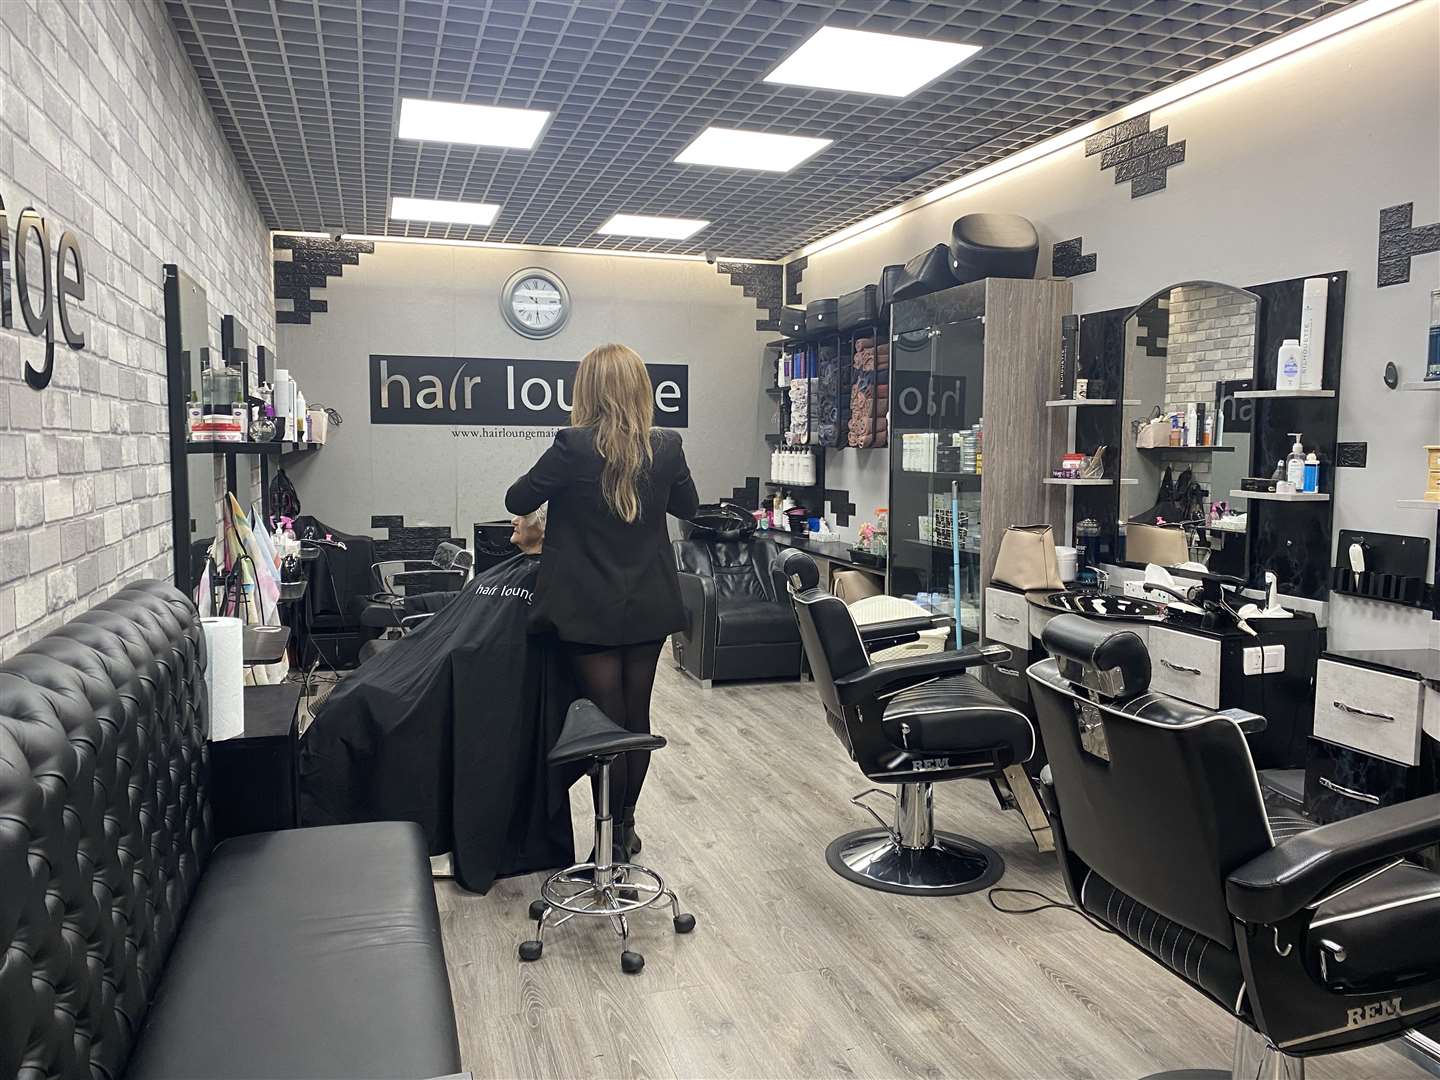 The day before restrictions lifted, staff at the Hair Lounge were not wearing masks